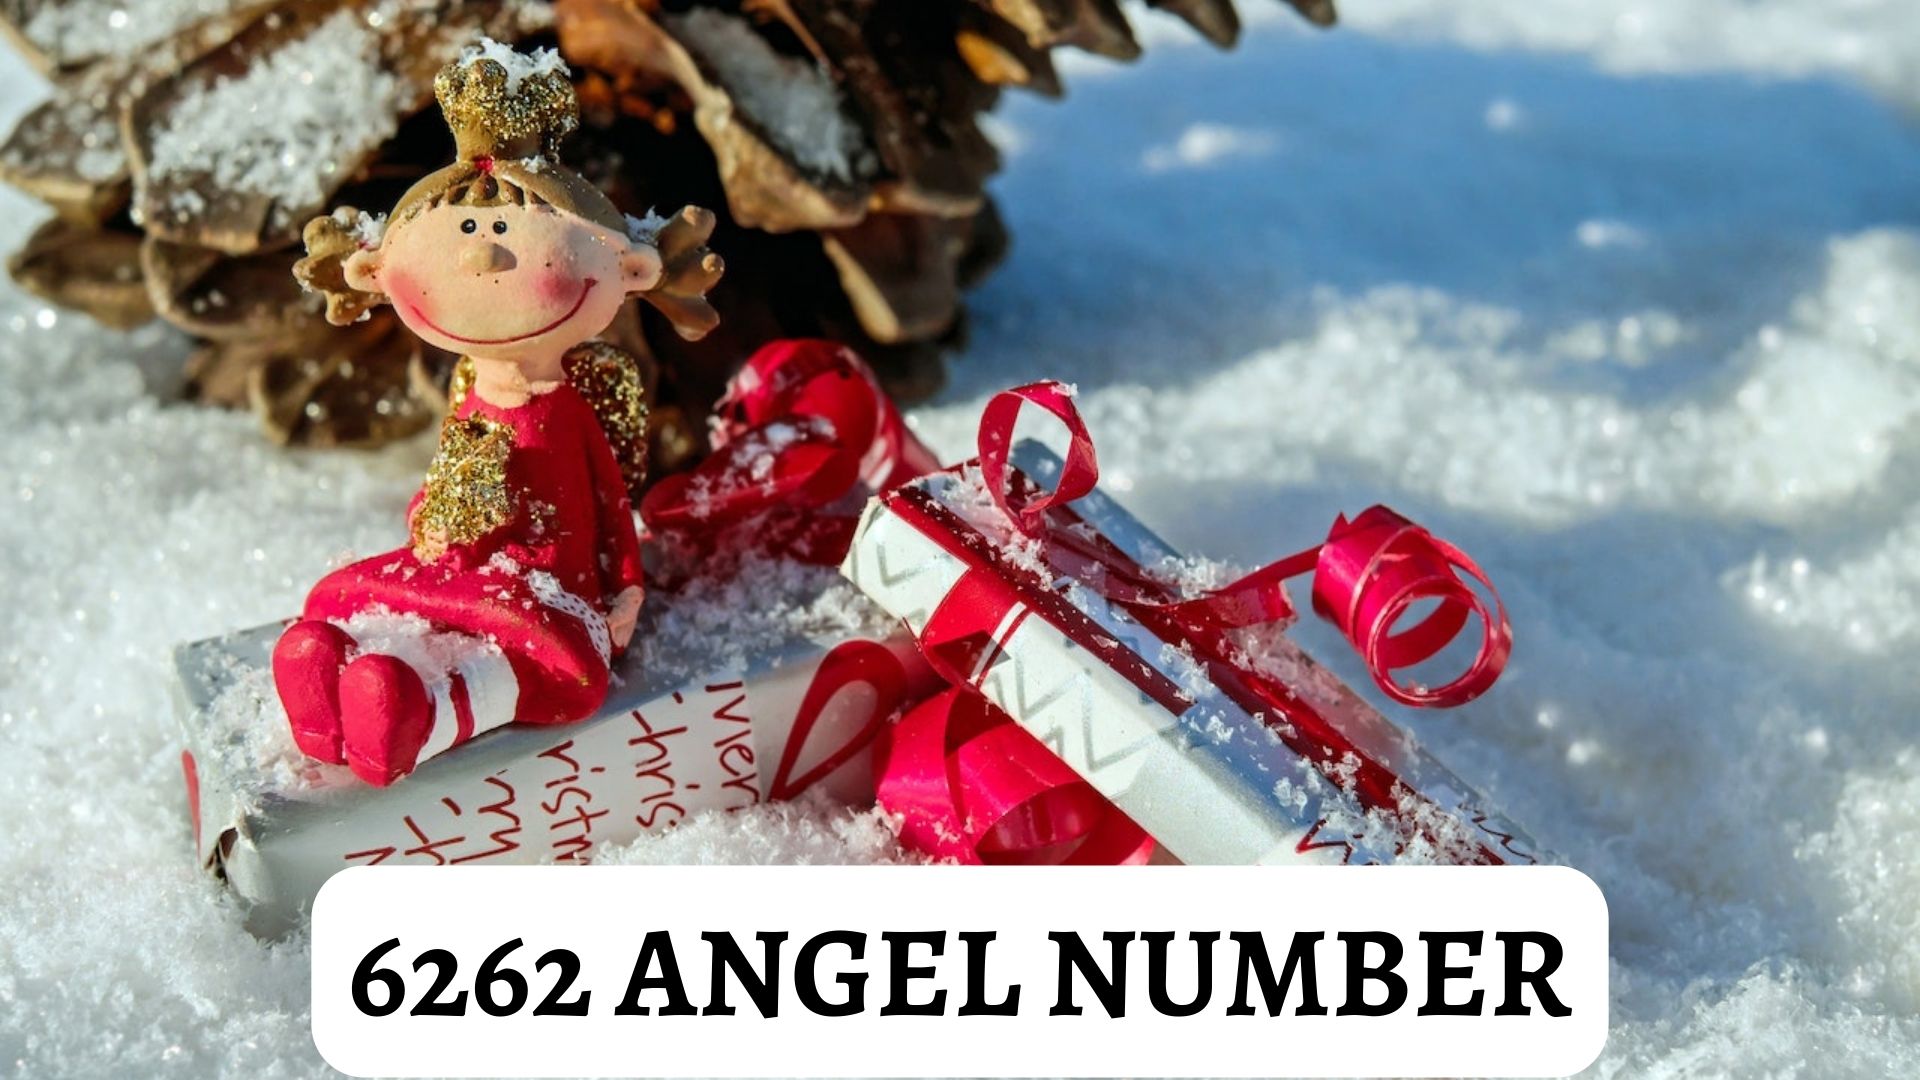 6262 Angel Number - It Represents One's Personal Growth